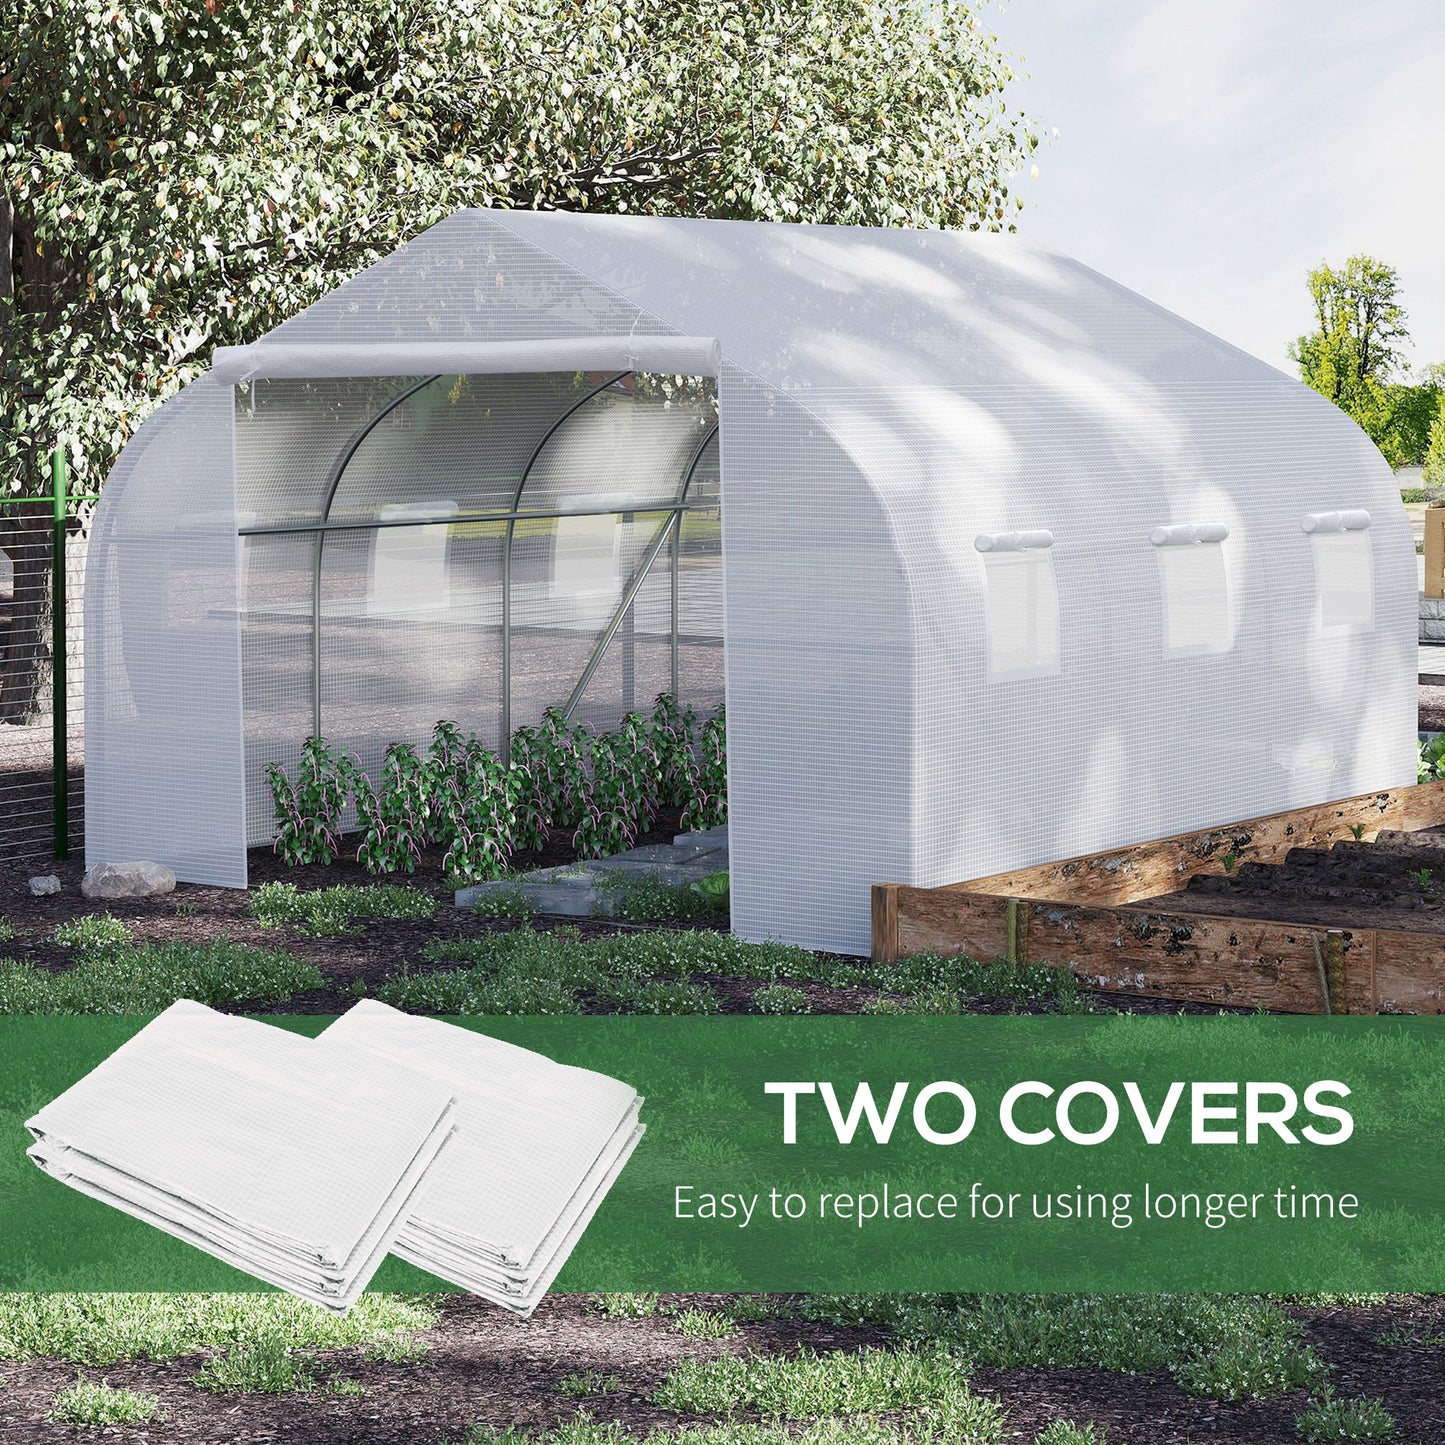 Outsunny Walk-In Tunnel Greenhouse with Replacement Cover, Outdoor Growhouse with PE Cover, Roll Up Door and 6 Windows, 4.5 x 3 x 2 m, White